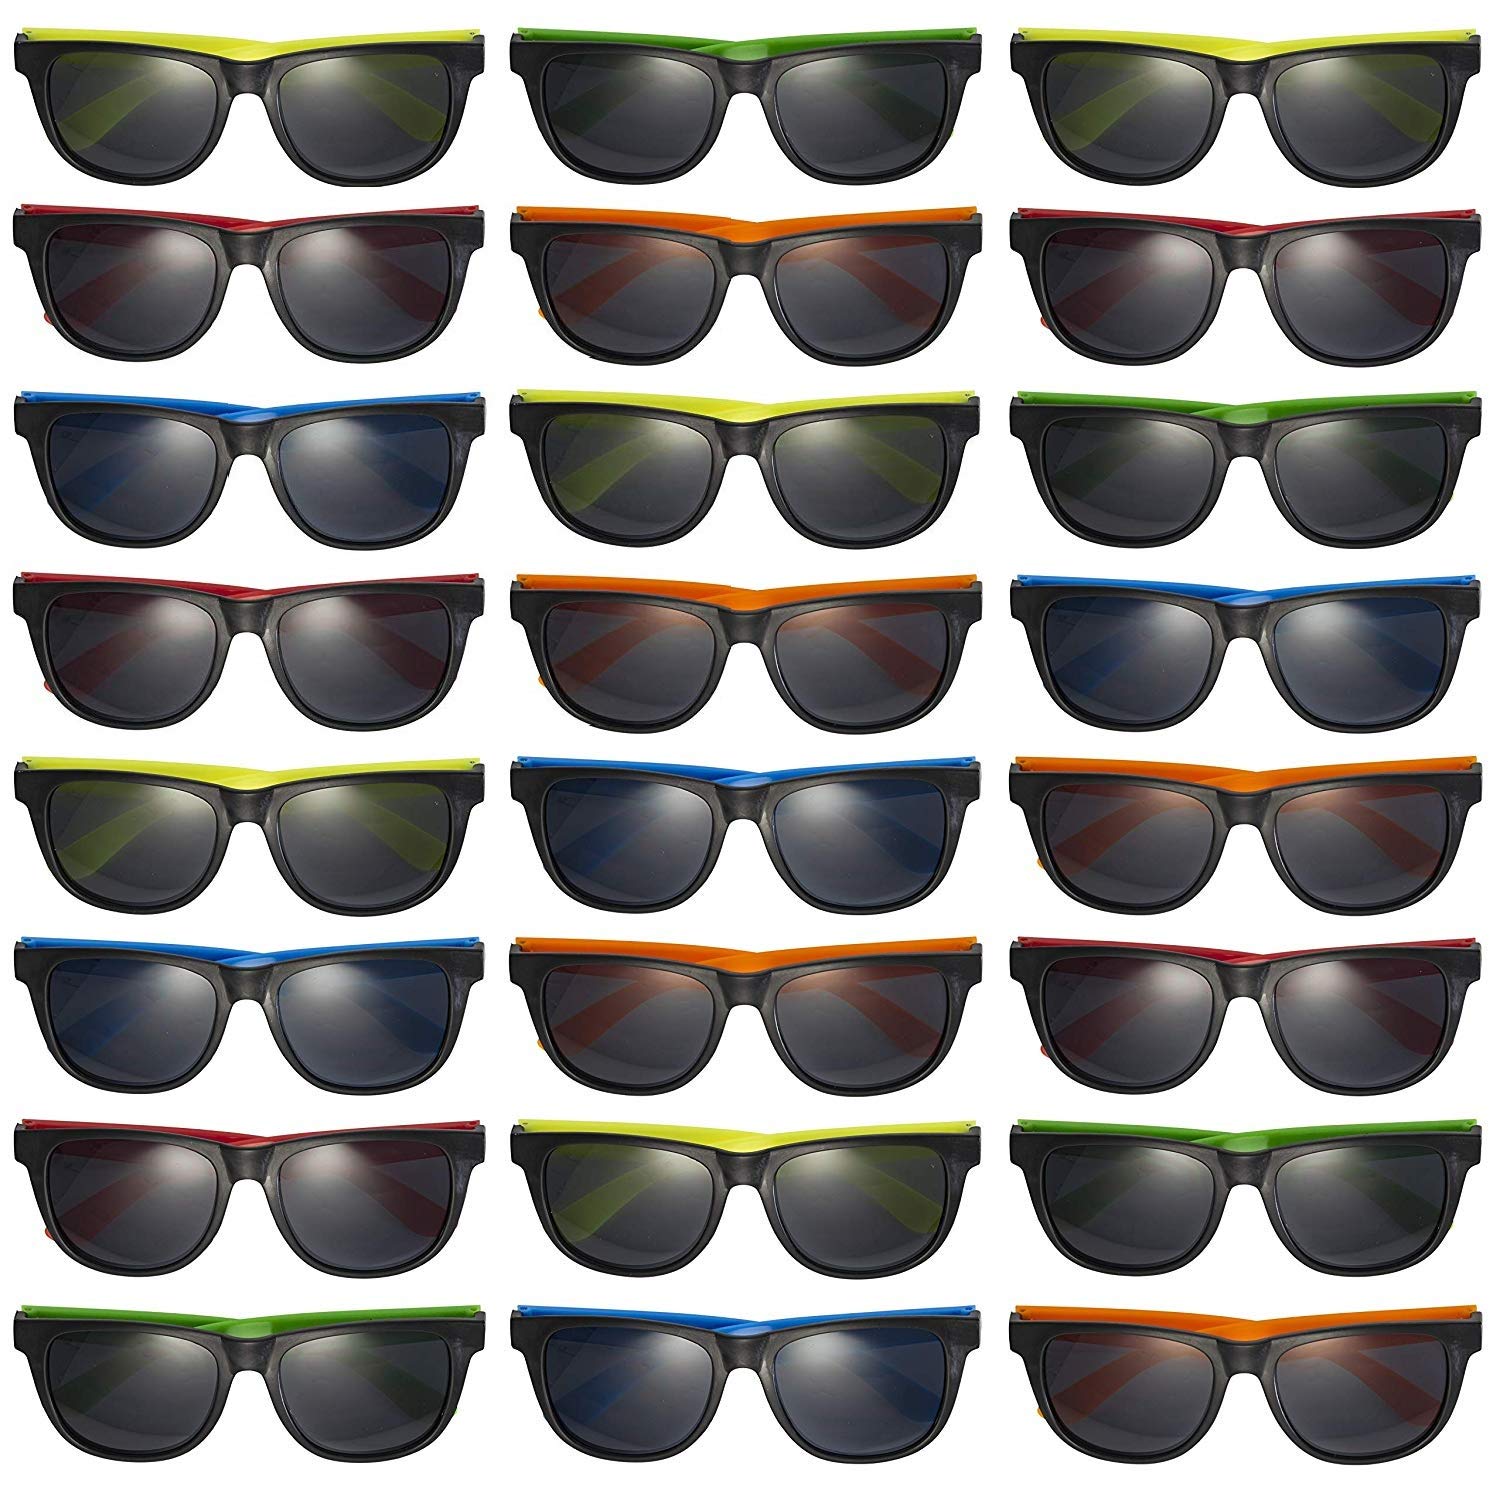 PREXTEX 25-Pack Kids Sunglasses Bulk - Neon Sunglasses with UV Protection - Bulk Sunglasses for Kids - Perfect Kids Party Favors for Summer, Beach Party - Bulk Kids Summer Glasses for Kids and Adults